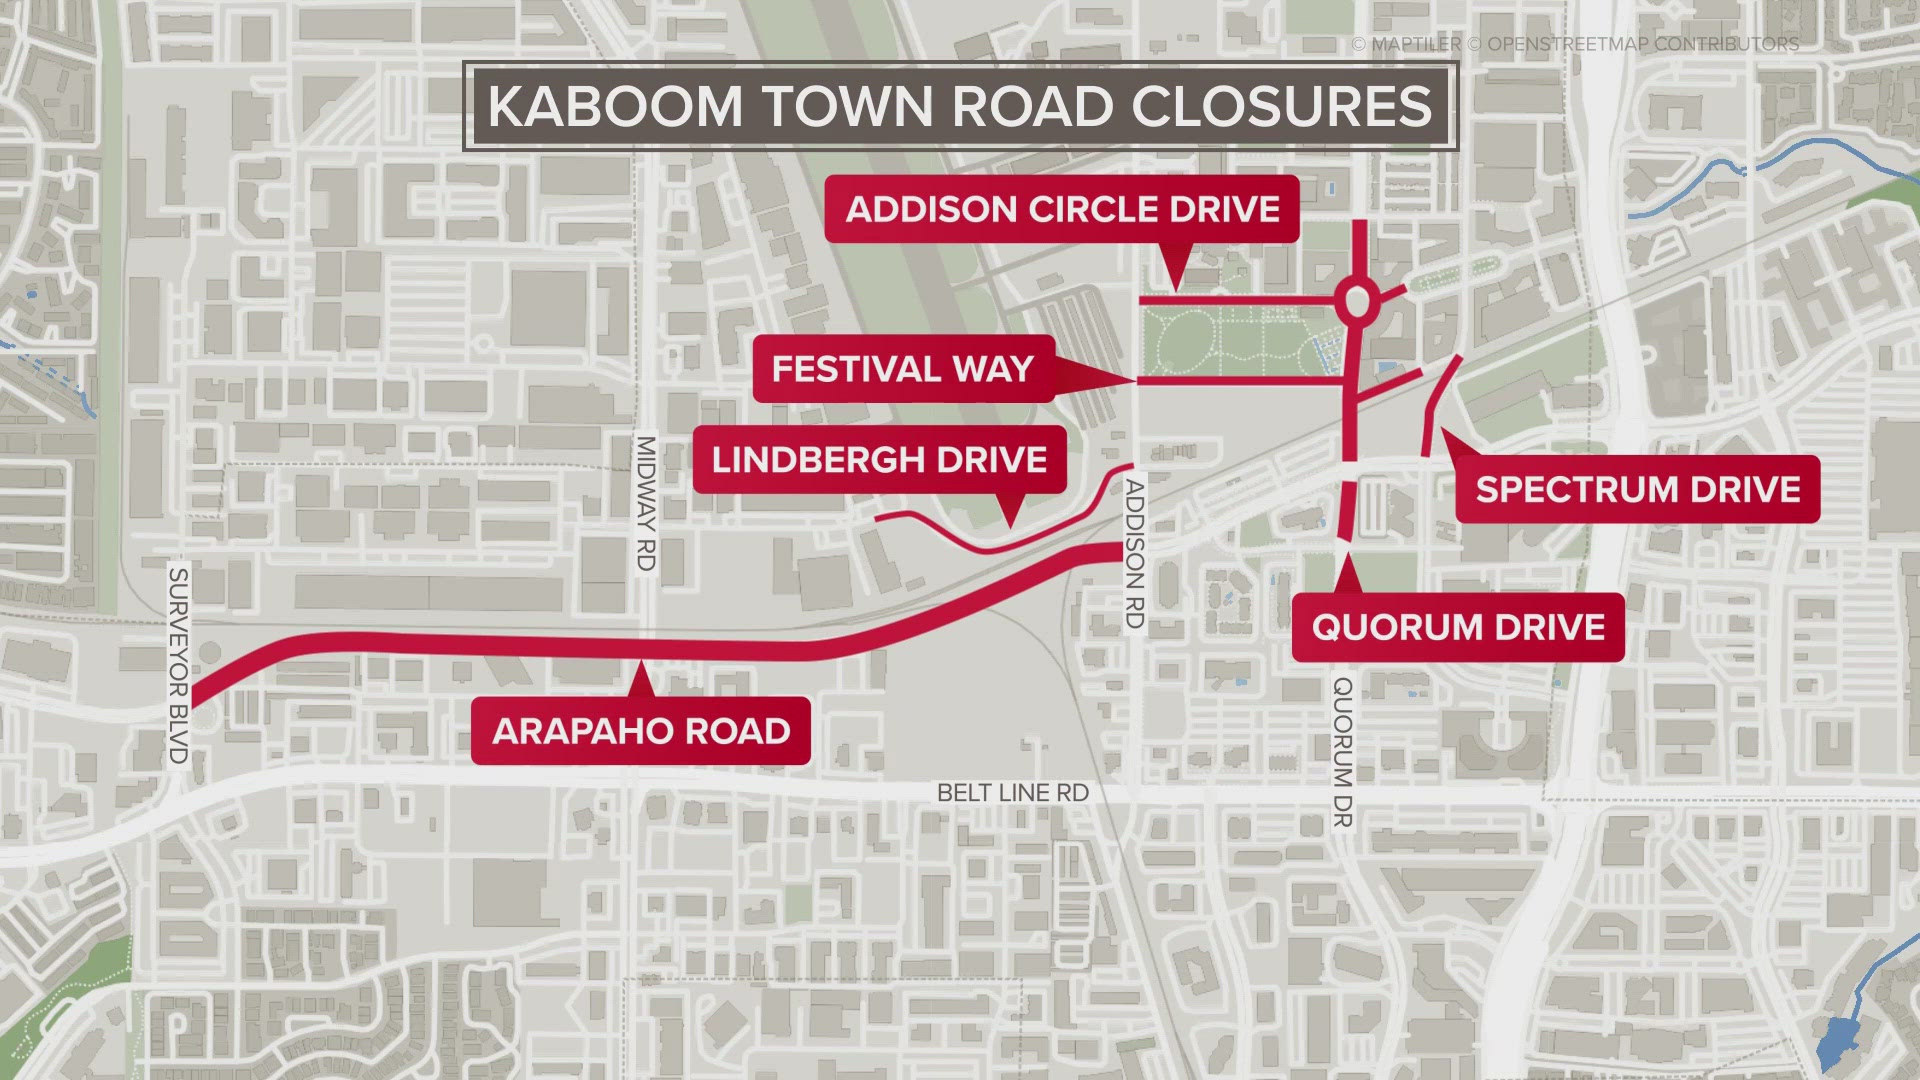 About 500,000 people will visit Addison for Kaboom Town tonight. Here's what to know about road closures around the event today.